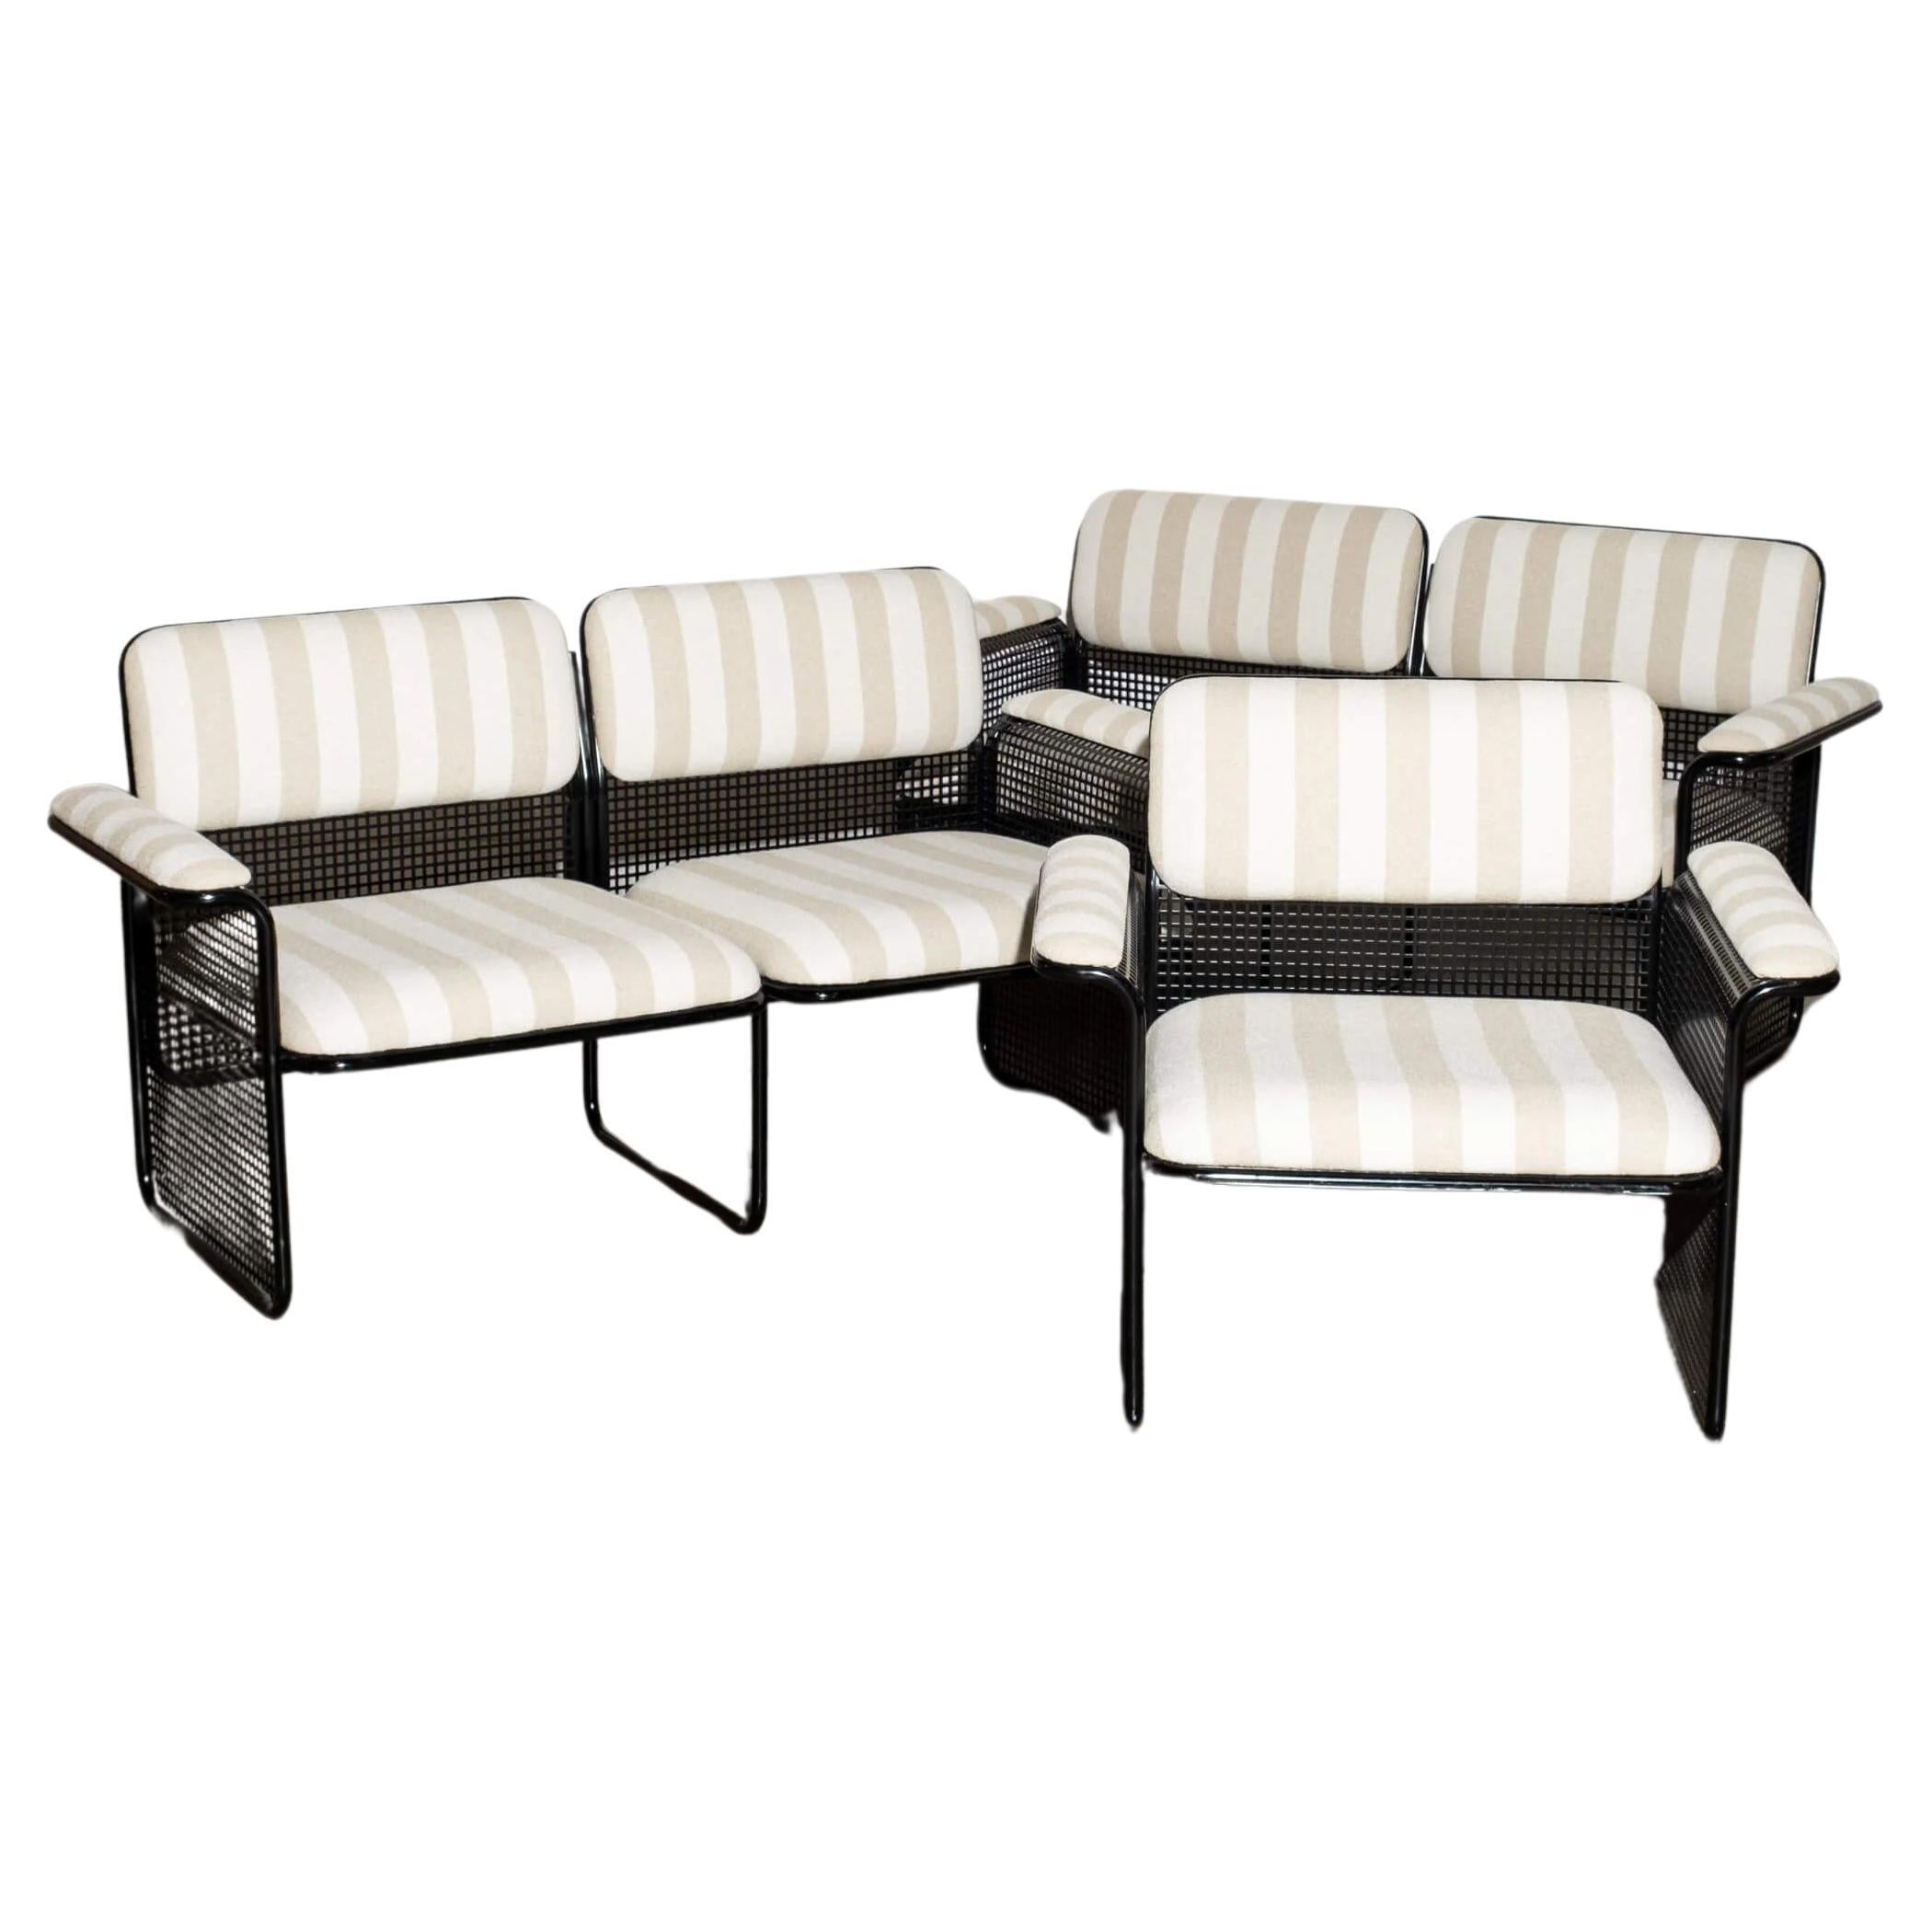 1970s Italian Solarium 3 Piece Set, Newly Upholstered For Sale